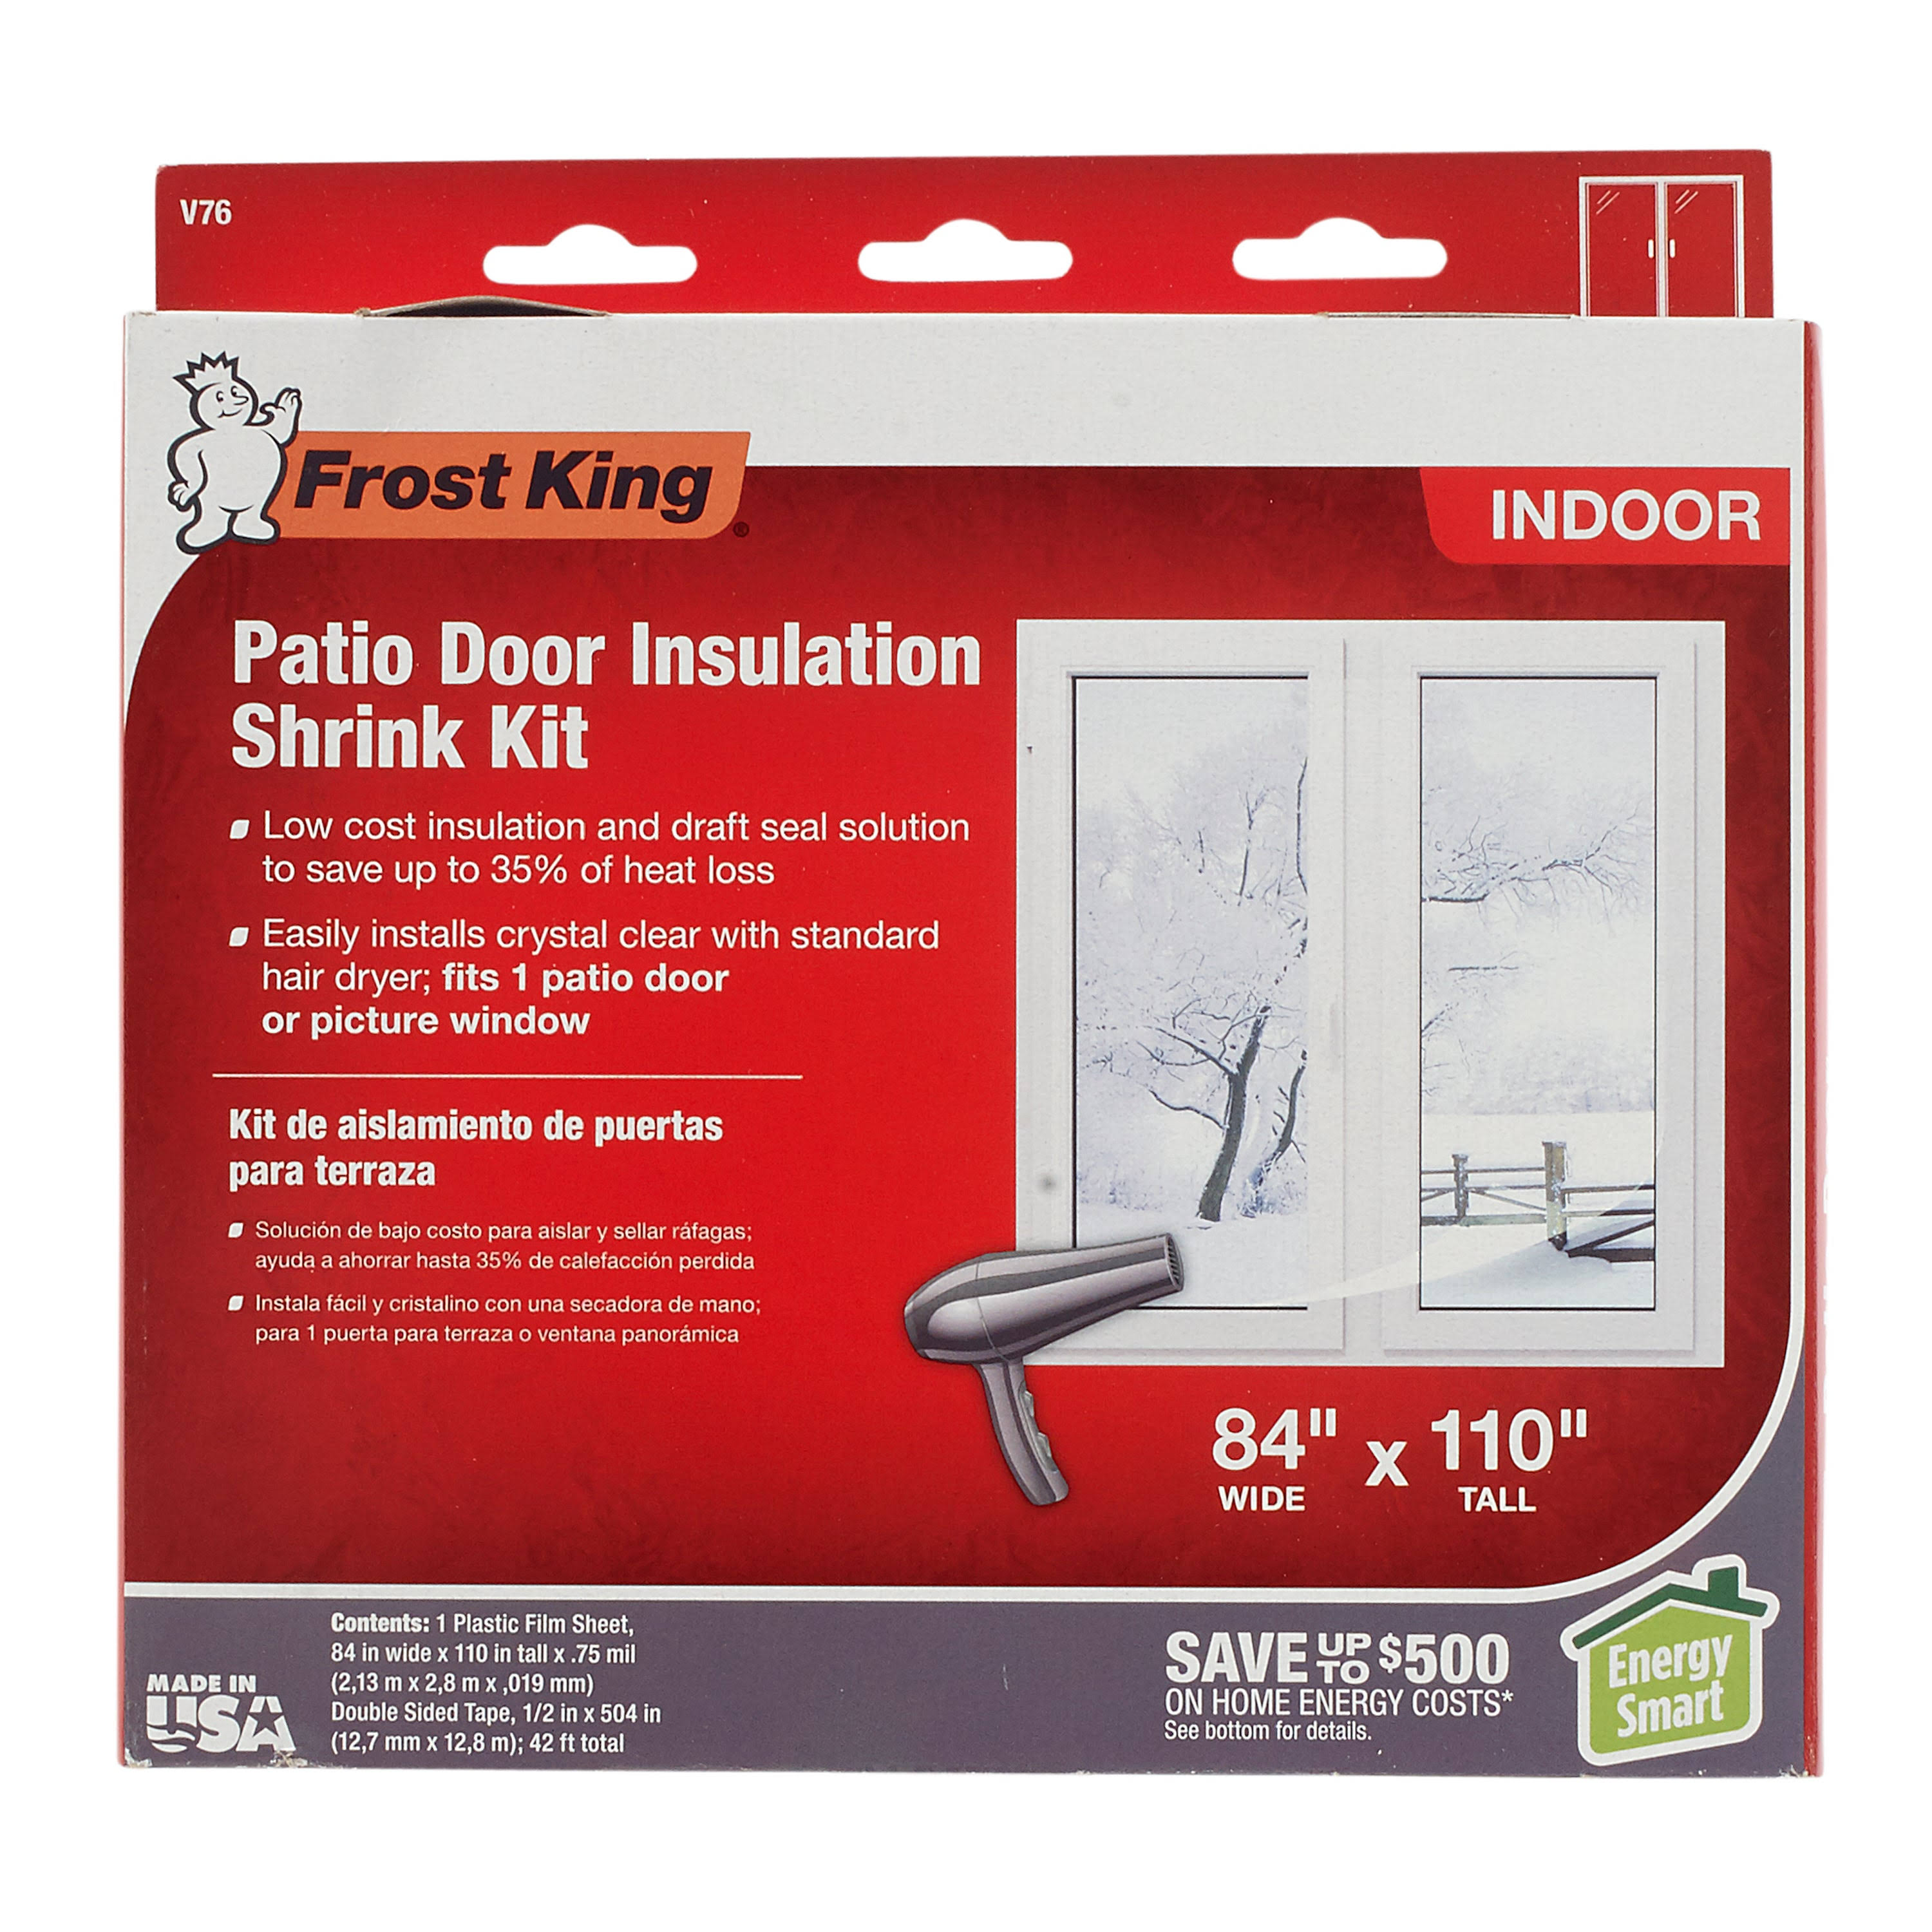 Thermwell V76 Frost King Patio Door Insulation Kit - 84" x 110", Clear